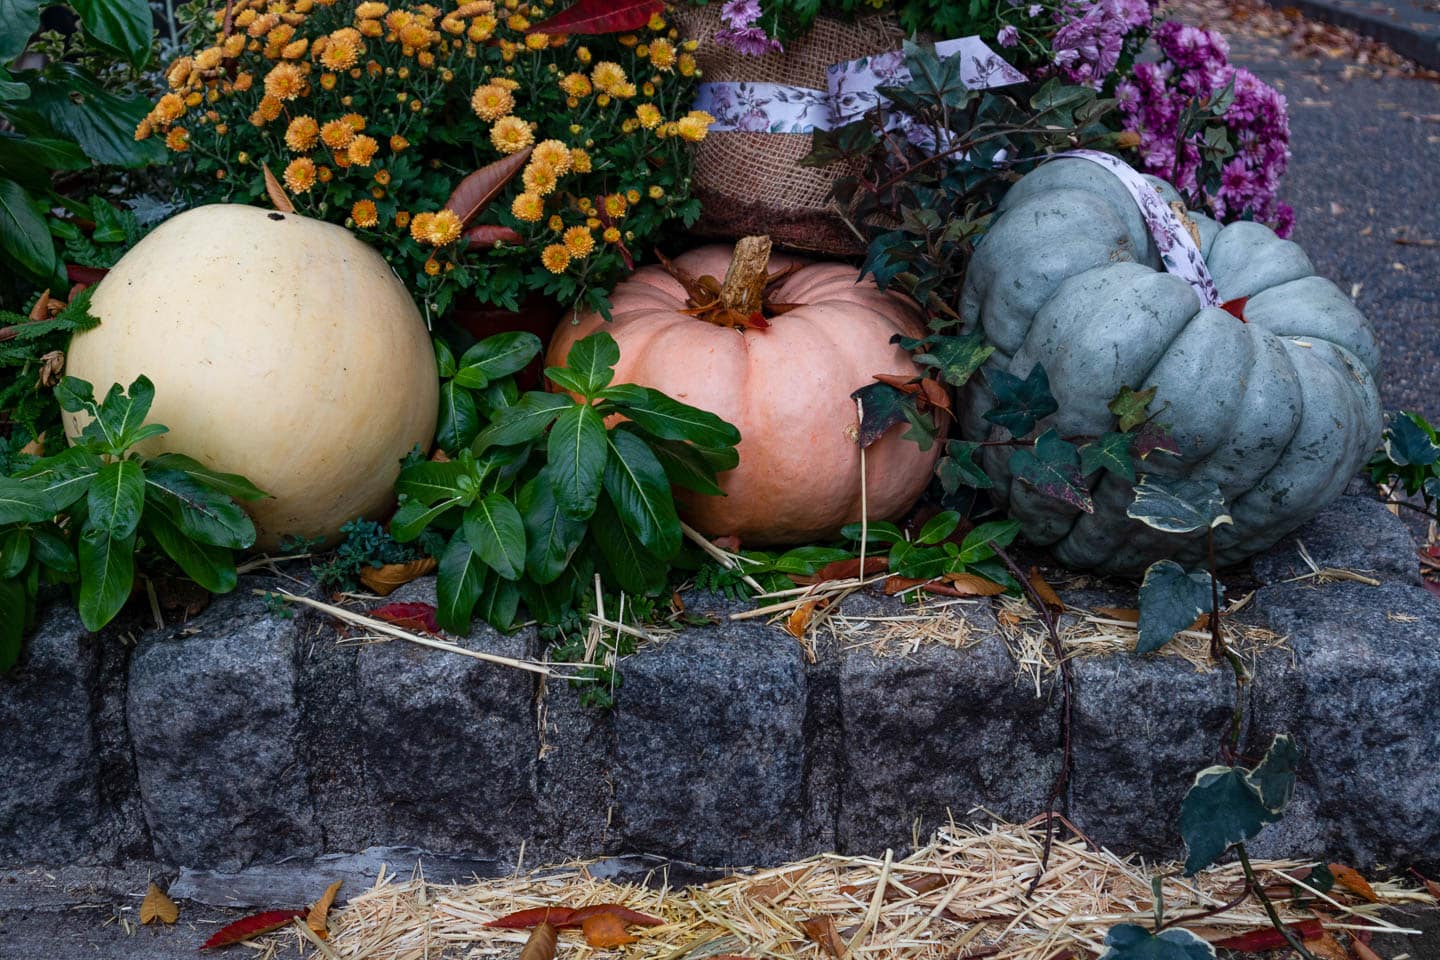 White, pink and blue pumpkins in front of orange and purple Chrysanthemums